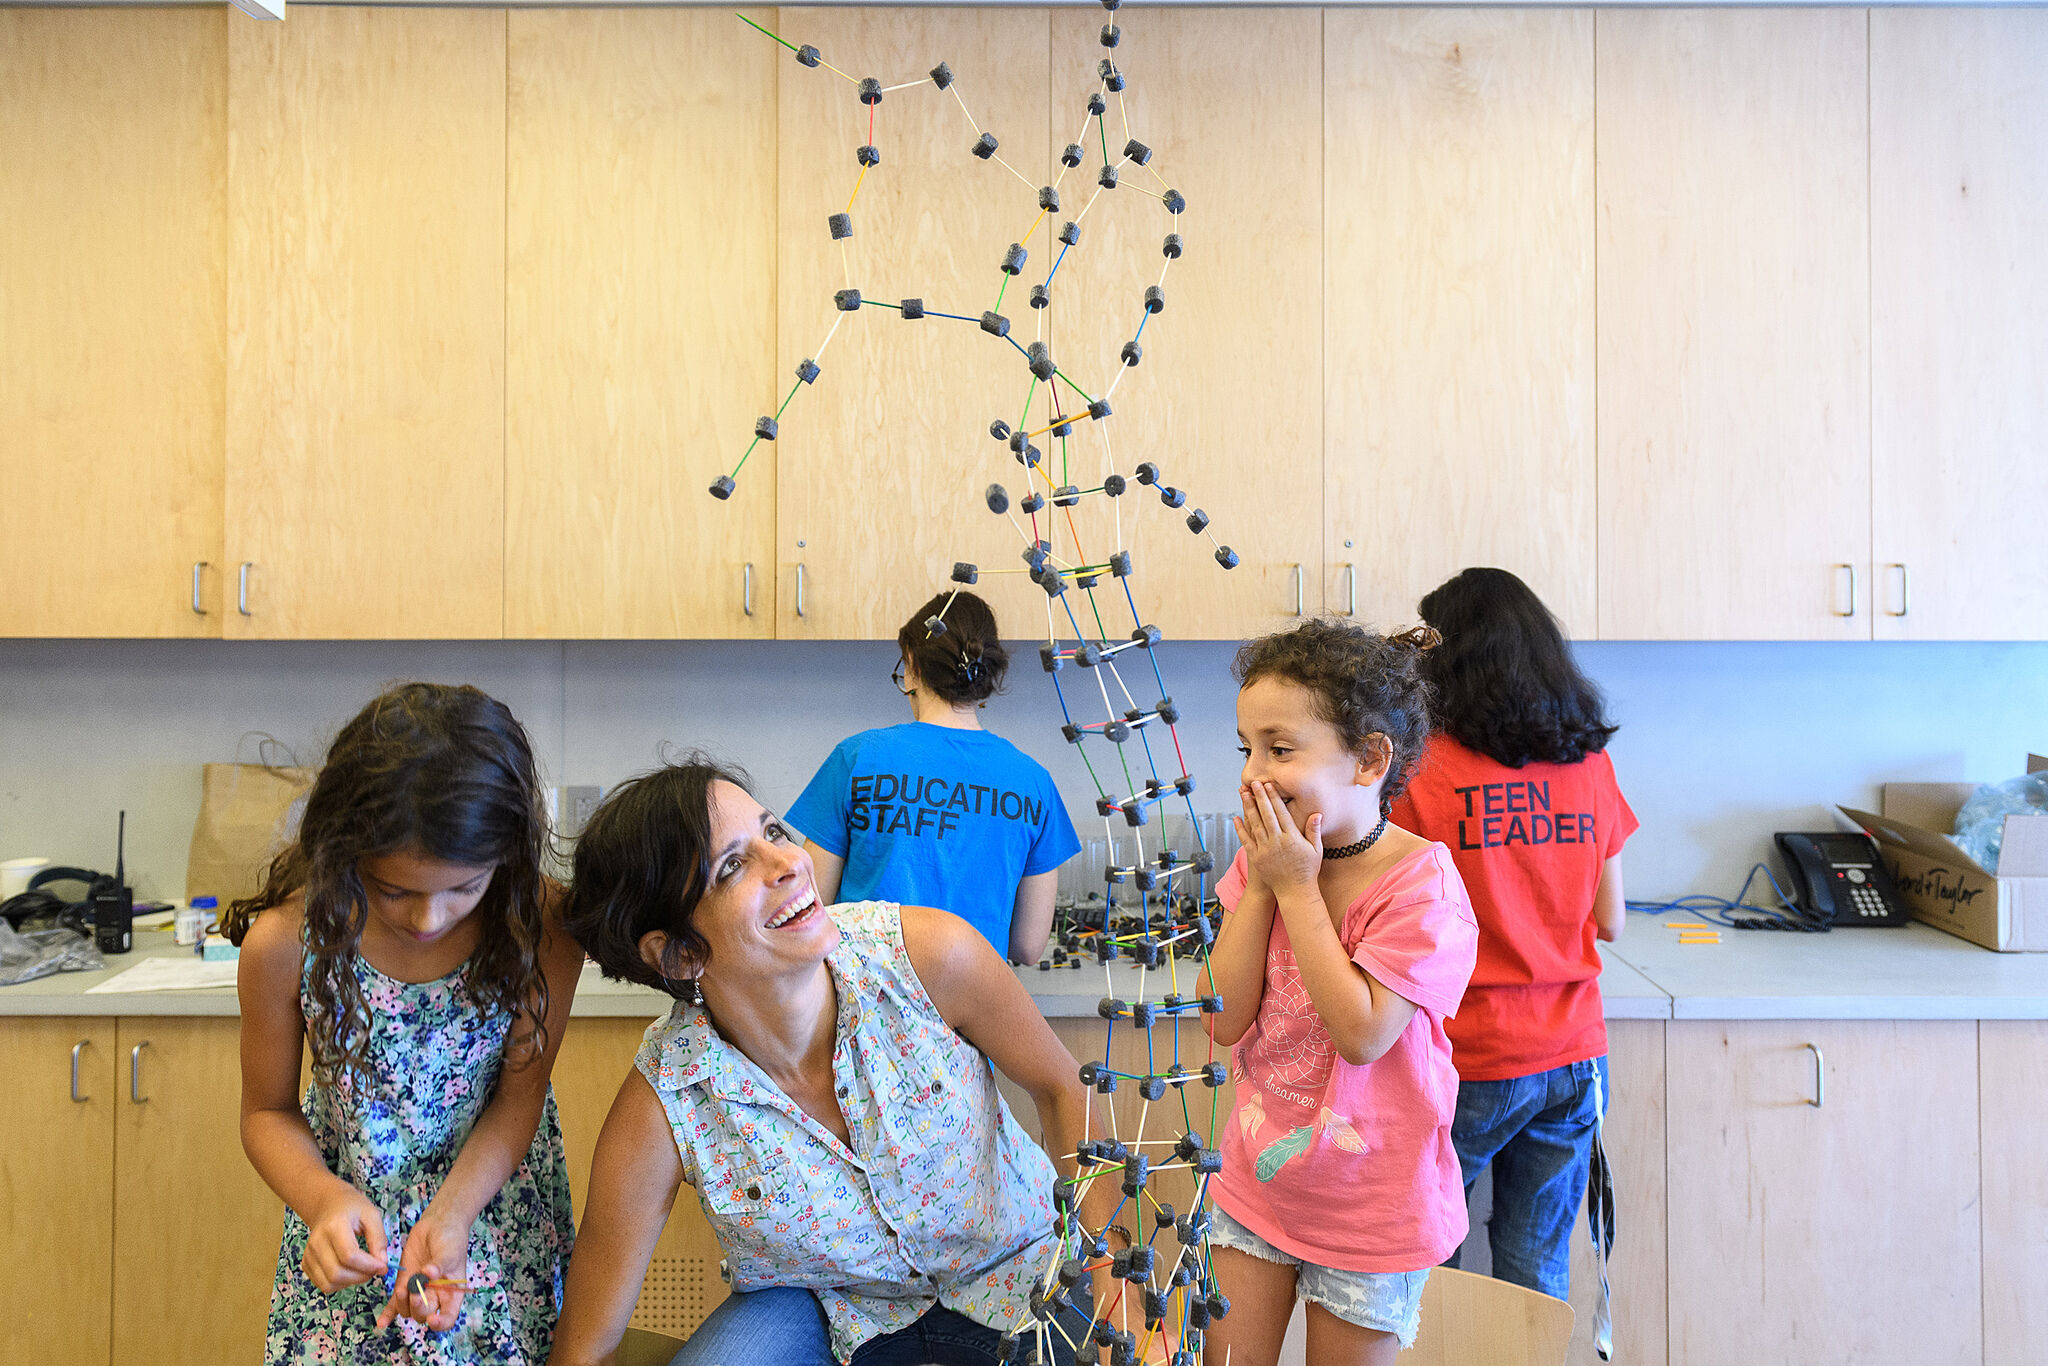 A family creates the tallest balancing sculpture at Open Studio event